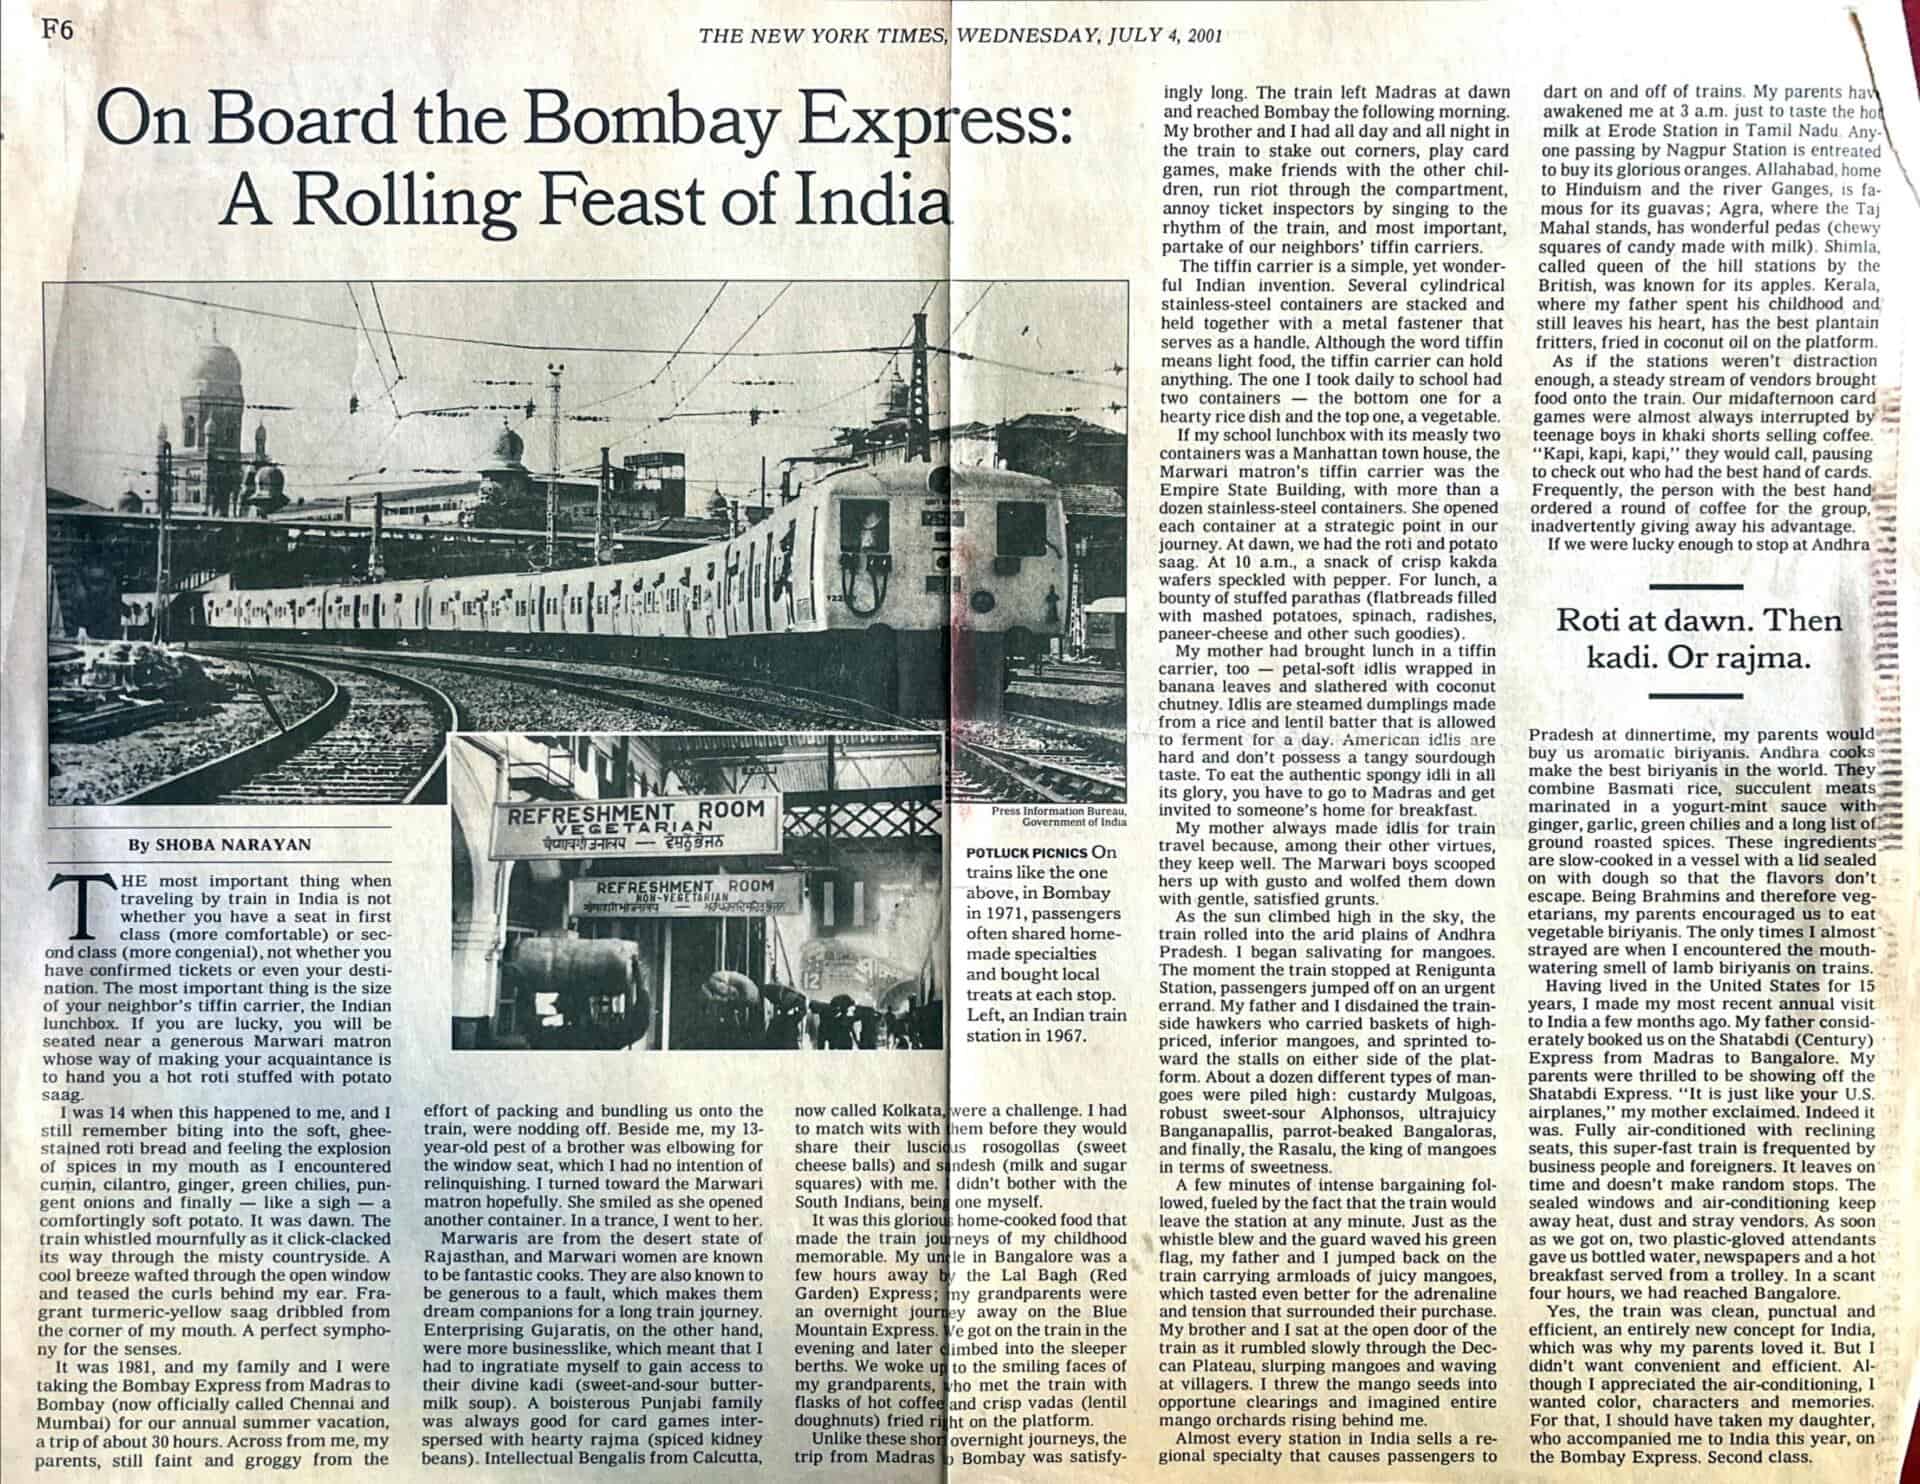 On Board the Bombay Express New York Times